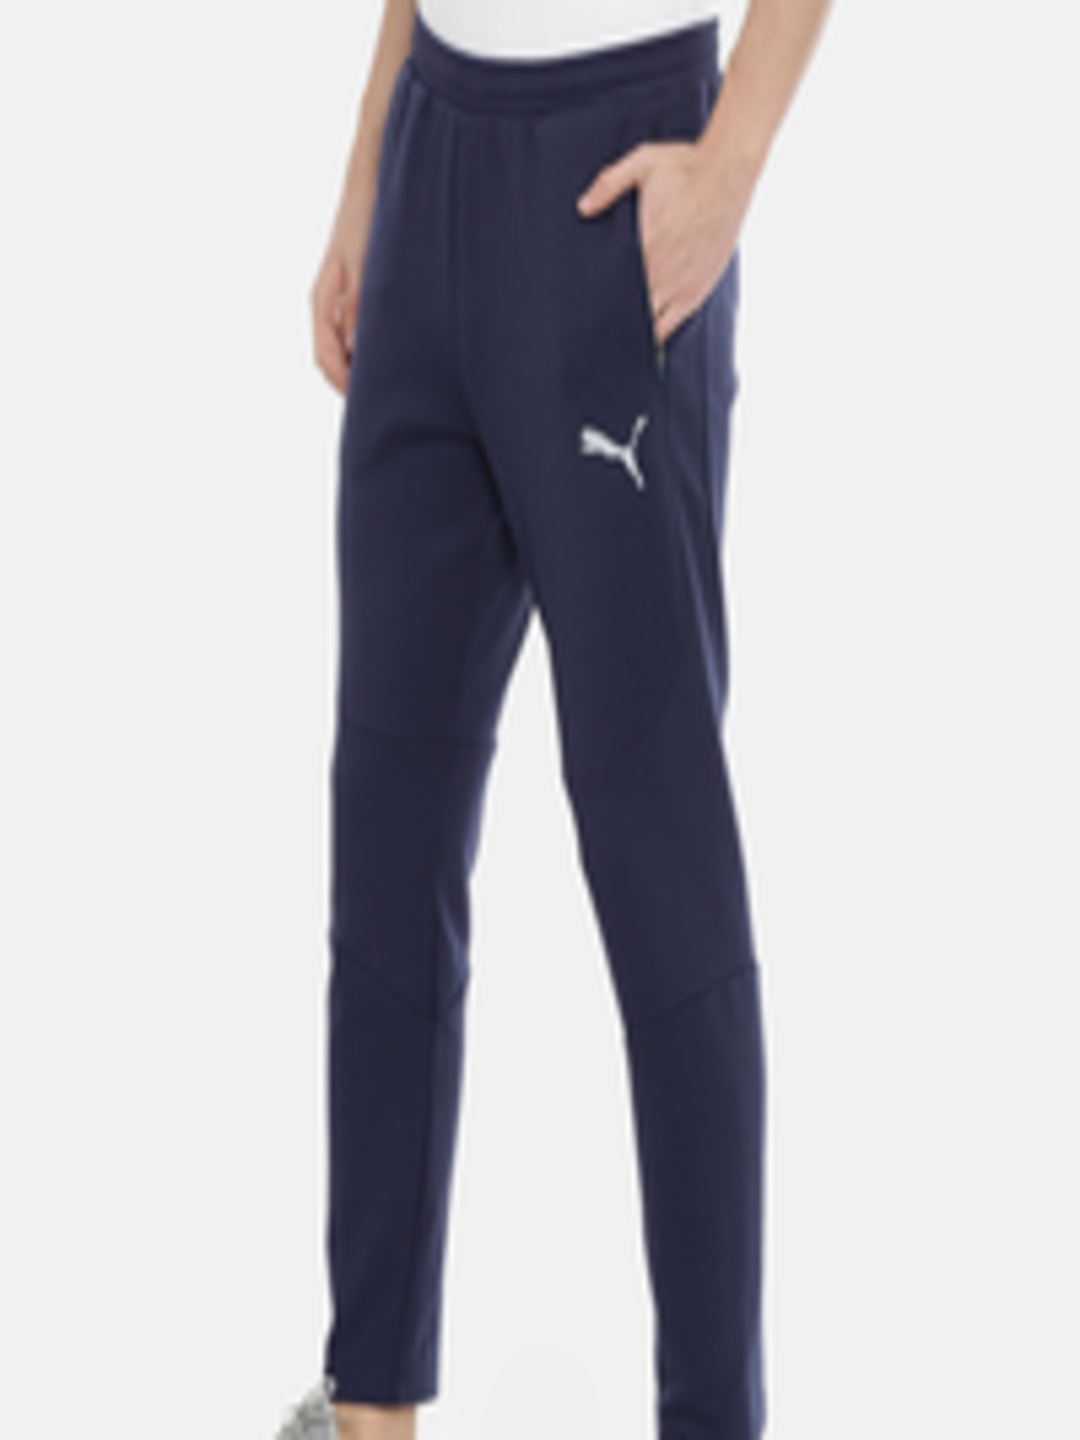 Buy Puma Men Navy Blue Solid DRYCELL Technology Track Pants - Track ...